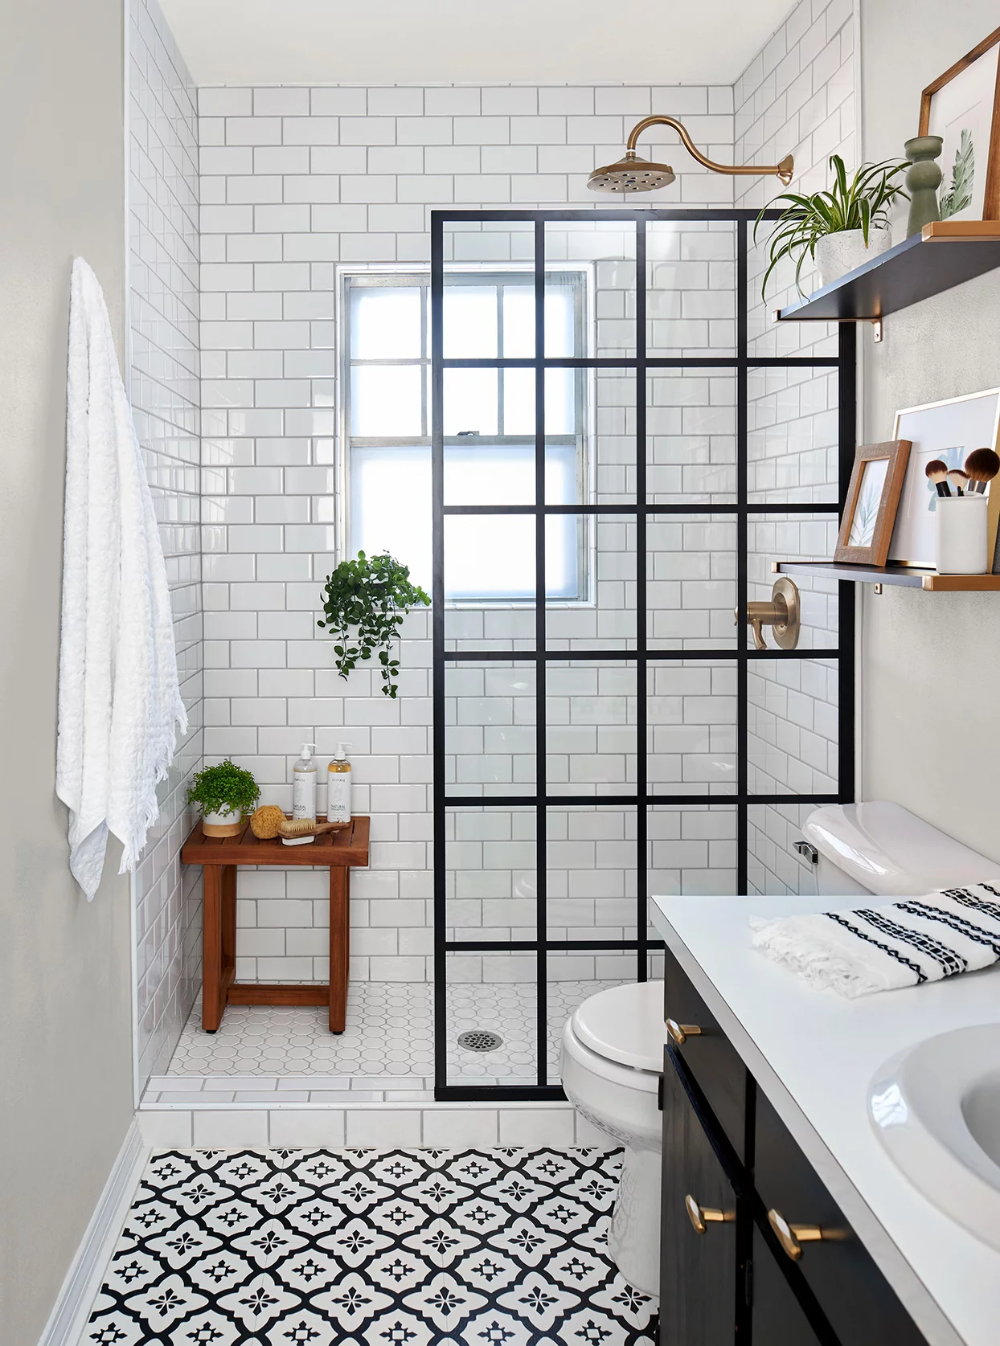 Transform Your Tiny Bathroom with These Space-Saving Makeover Ideas